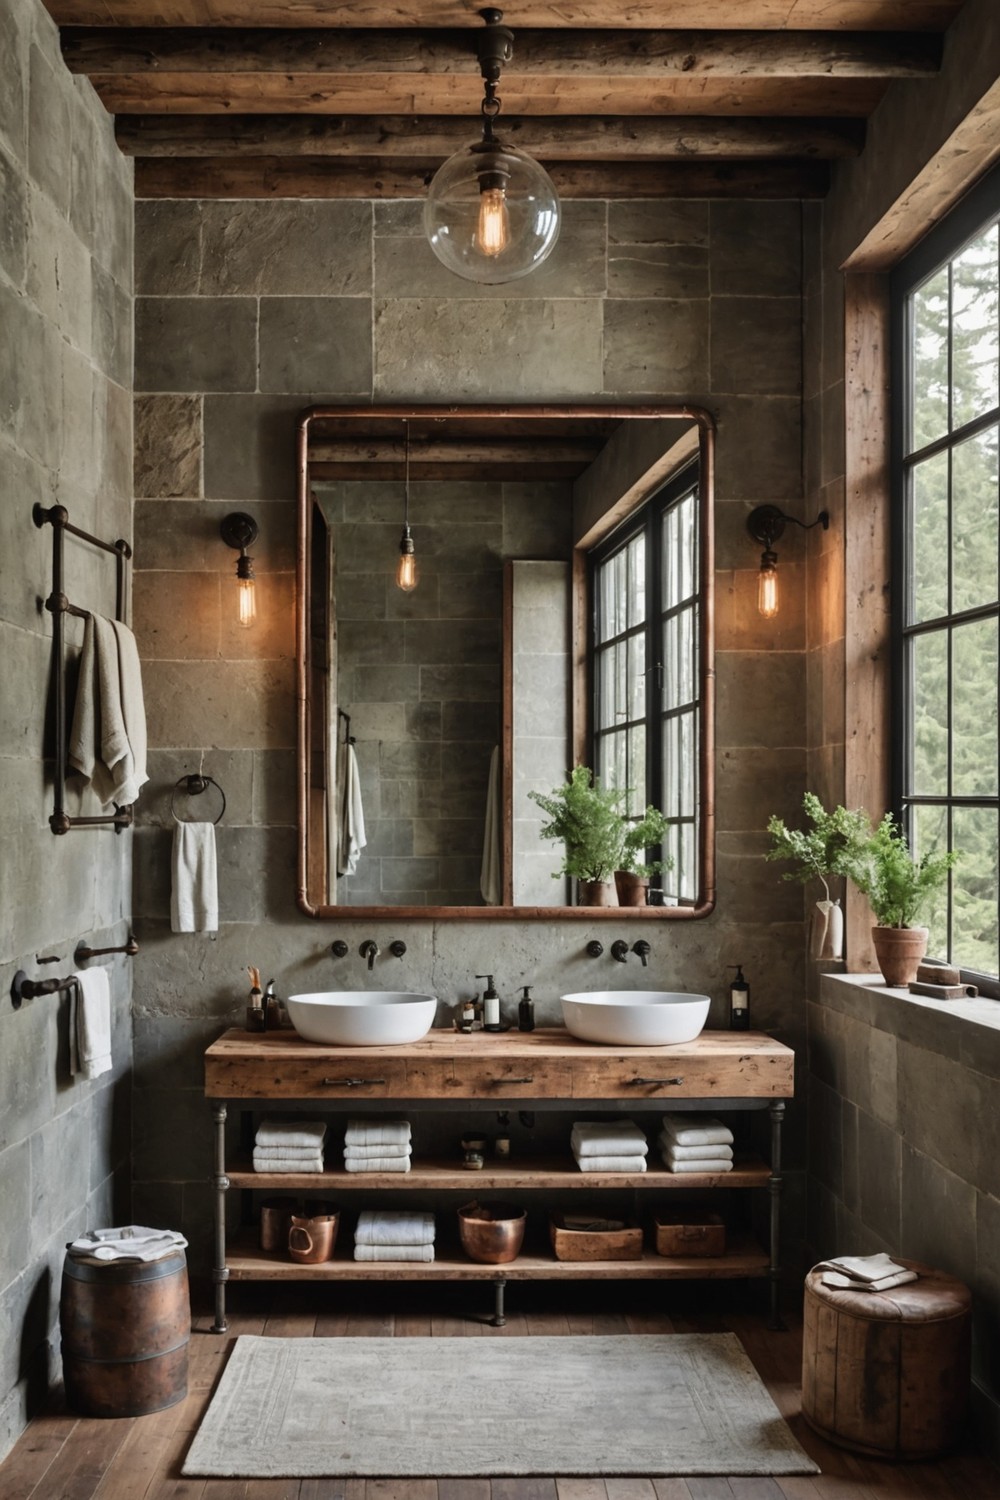 Rustic Industrial Bathroom Designs with Exposed Pipes